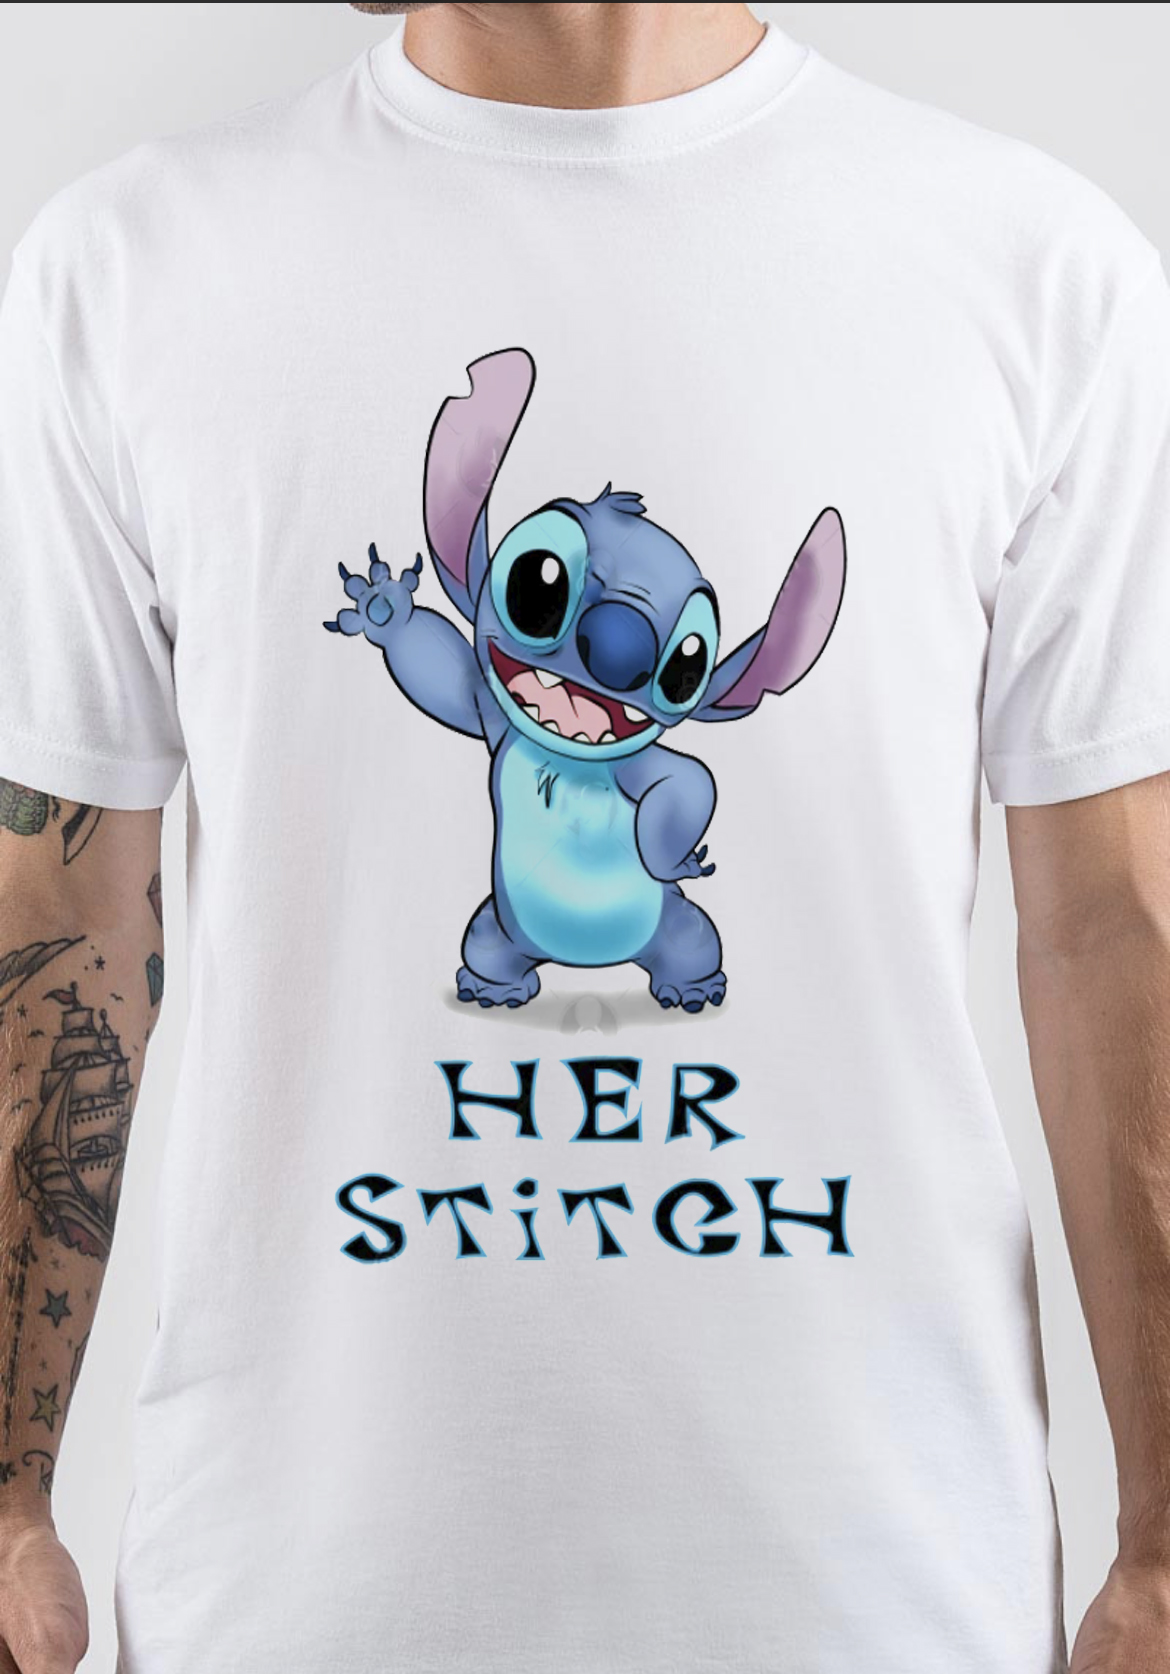 Lilo And Stitch T-Shirt And Merchandise